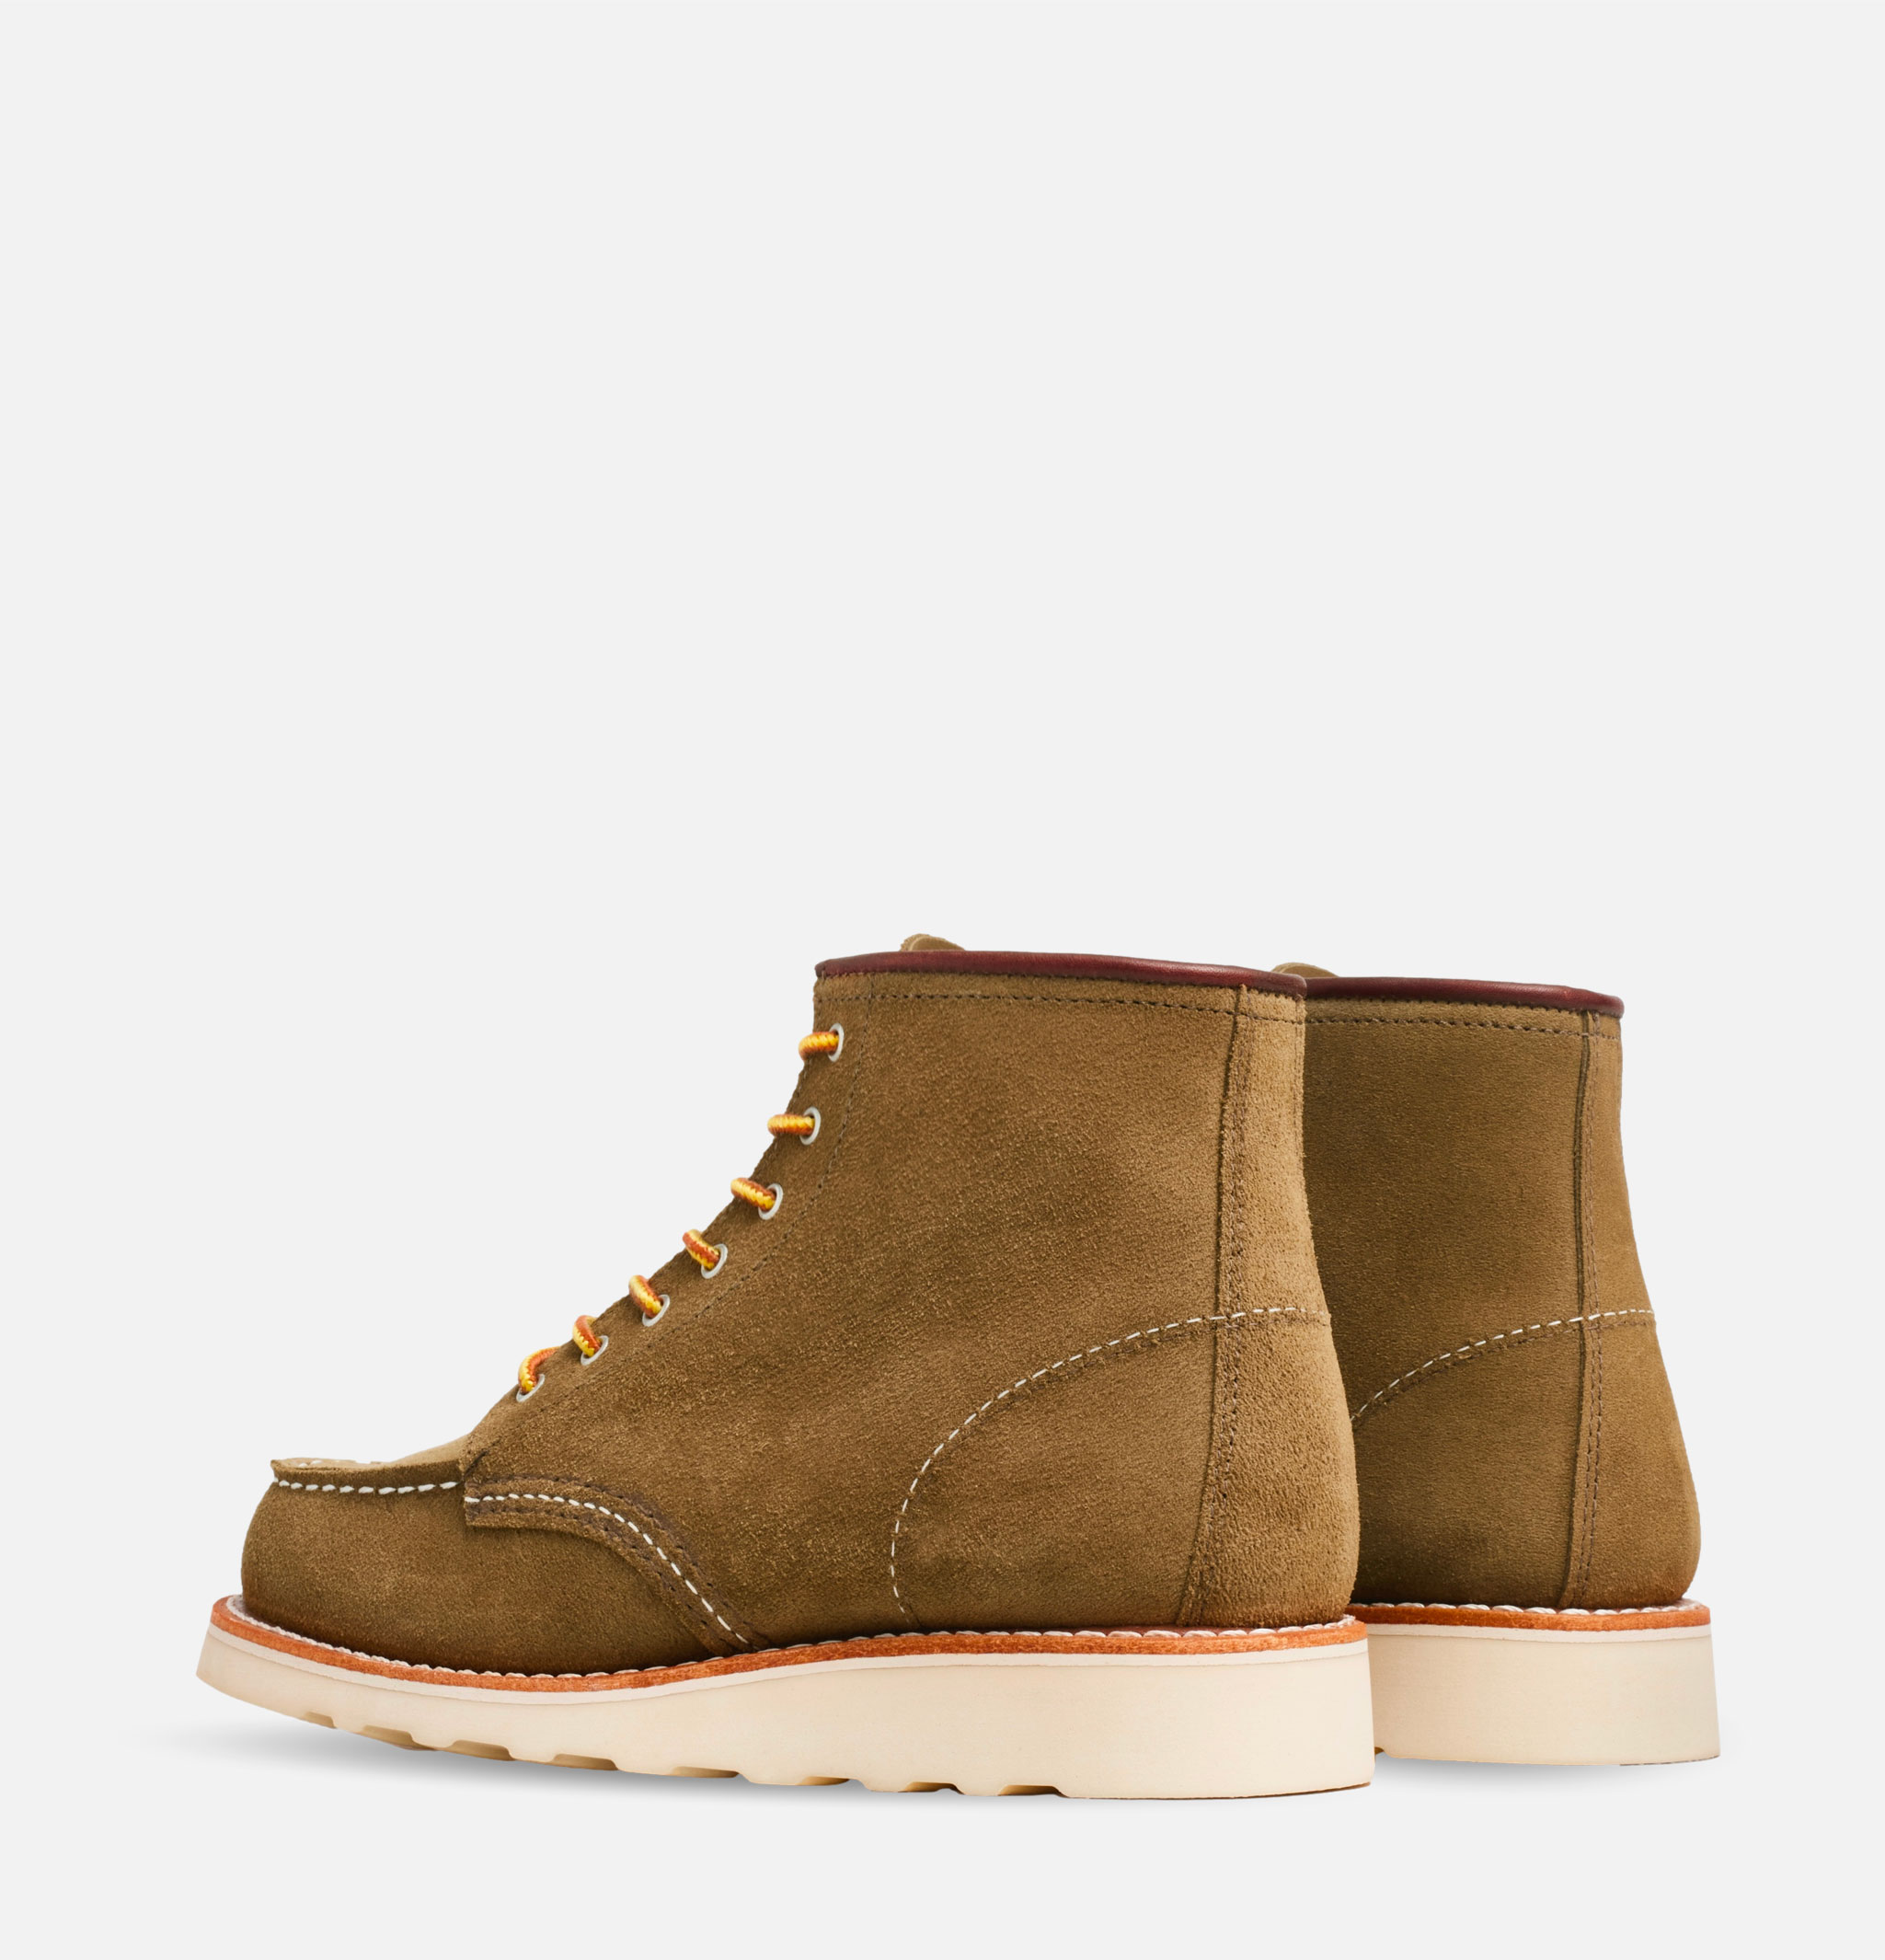 Red Wing Shoes Woman - 3377 - Moc Toe Olive